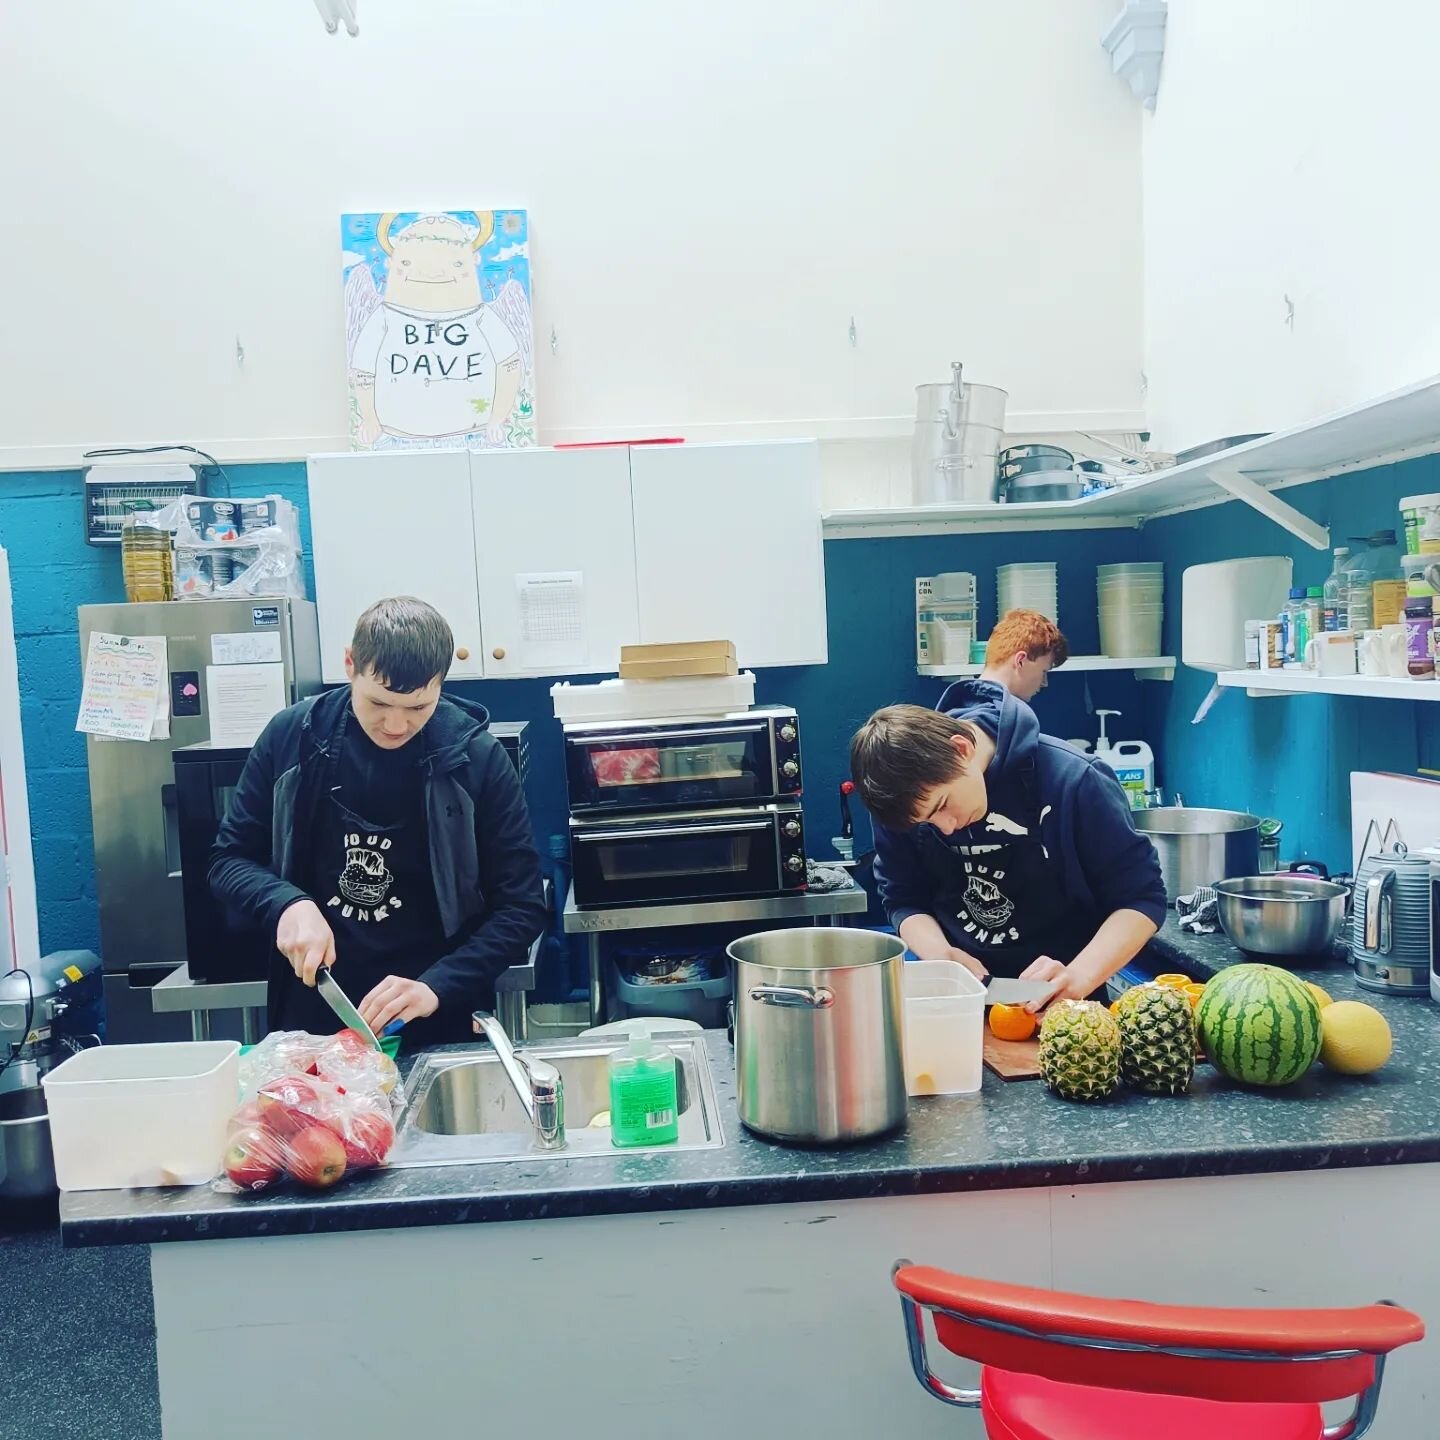 🌱 Fab morning down at the community garden with Greener Peebles today! 

👩&zwj;🍳 Our @food.punks cooked up some delicious pasta bakes and a banging fruit salad for the community meal - which meant several generations of happy bellies! 

⚽ Then thi